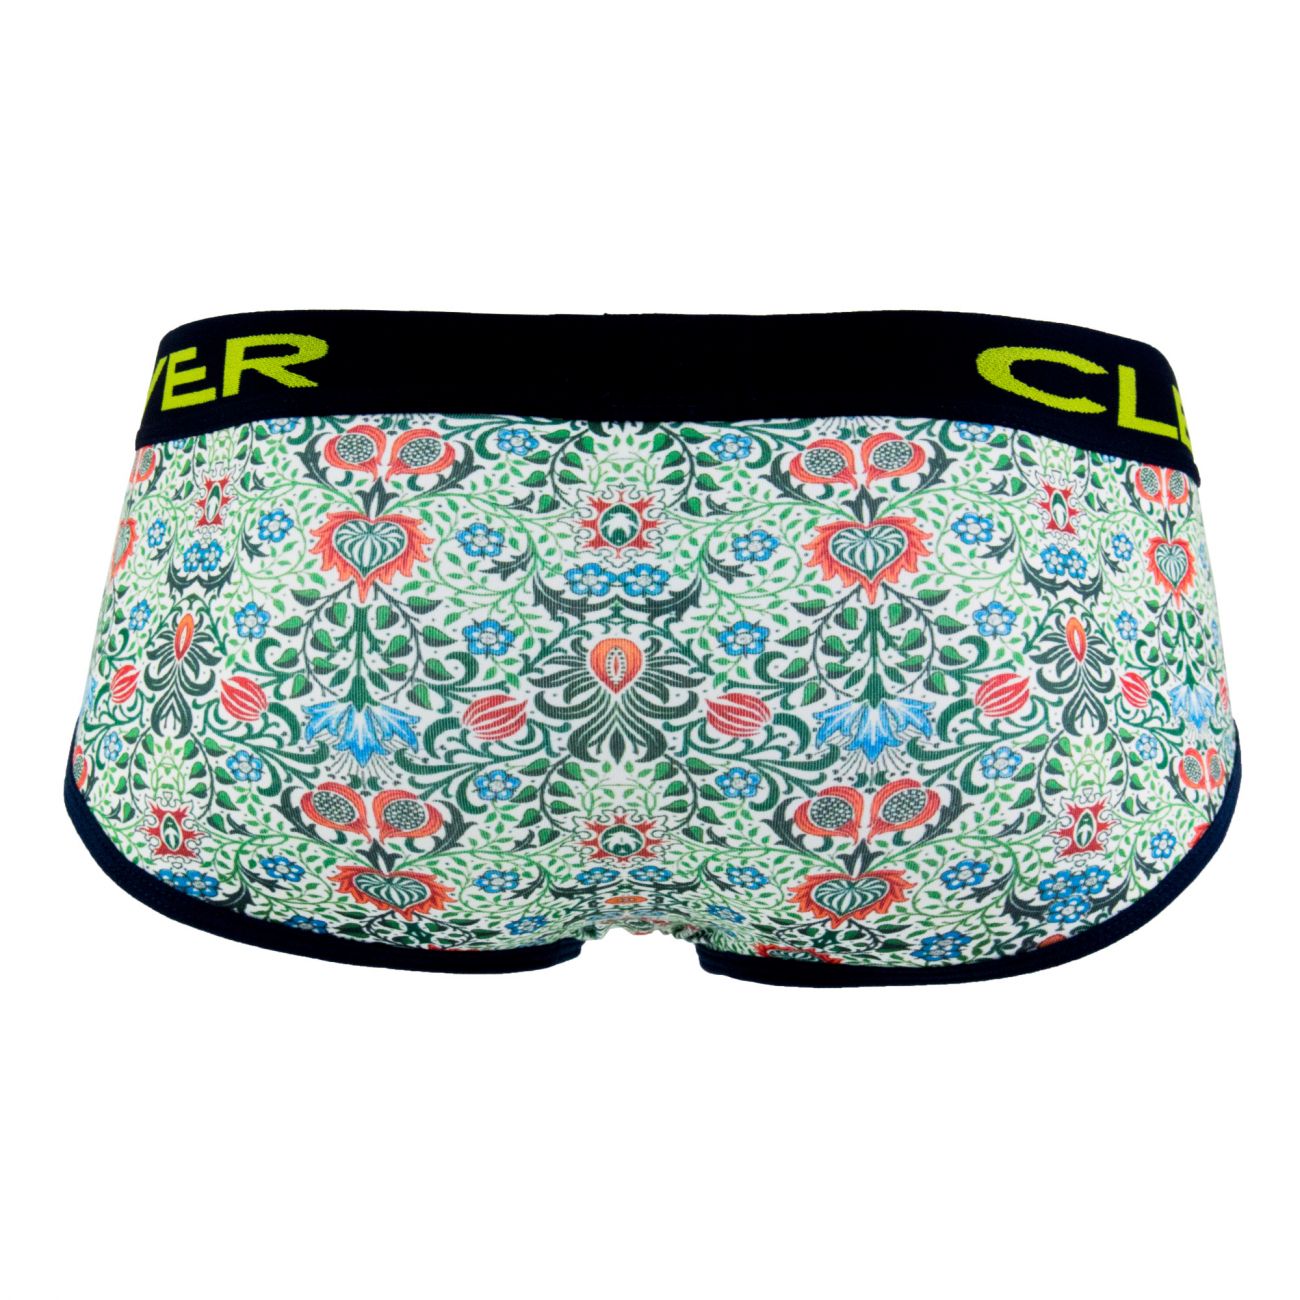 Clever 5344 Ivy Briefs Green